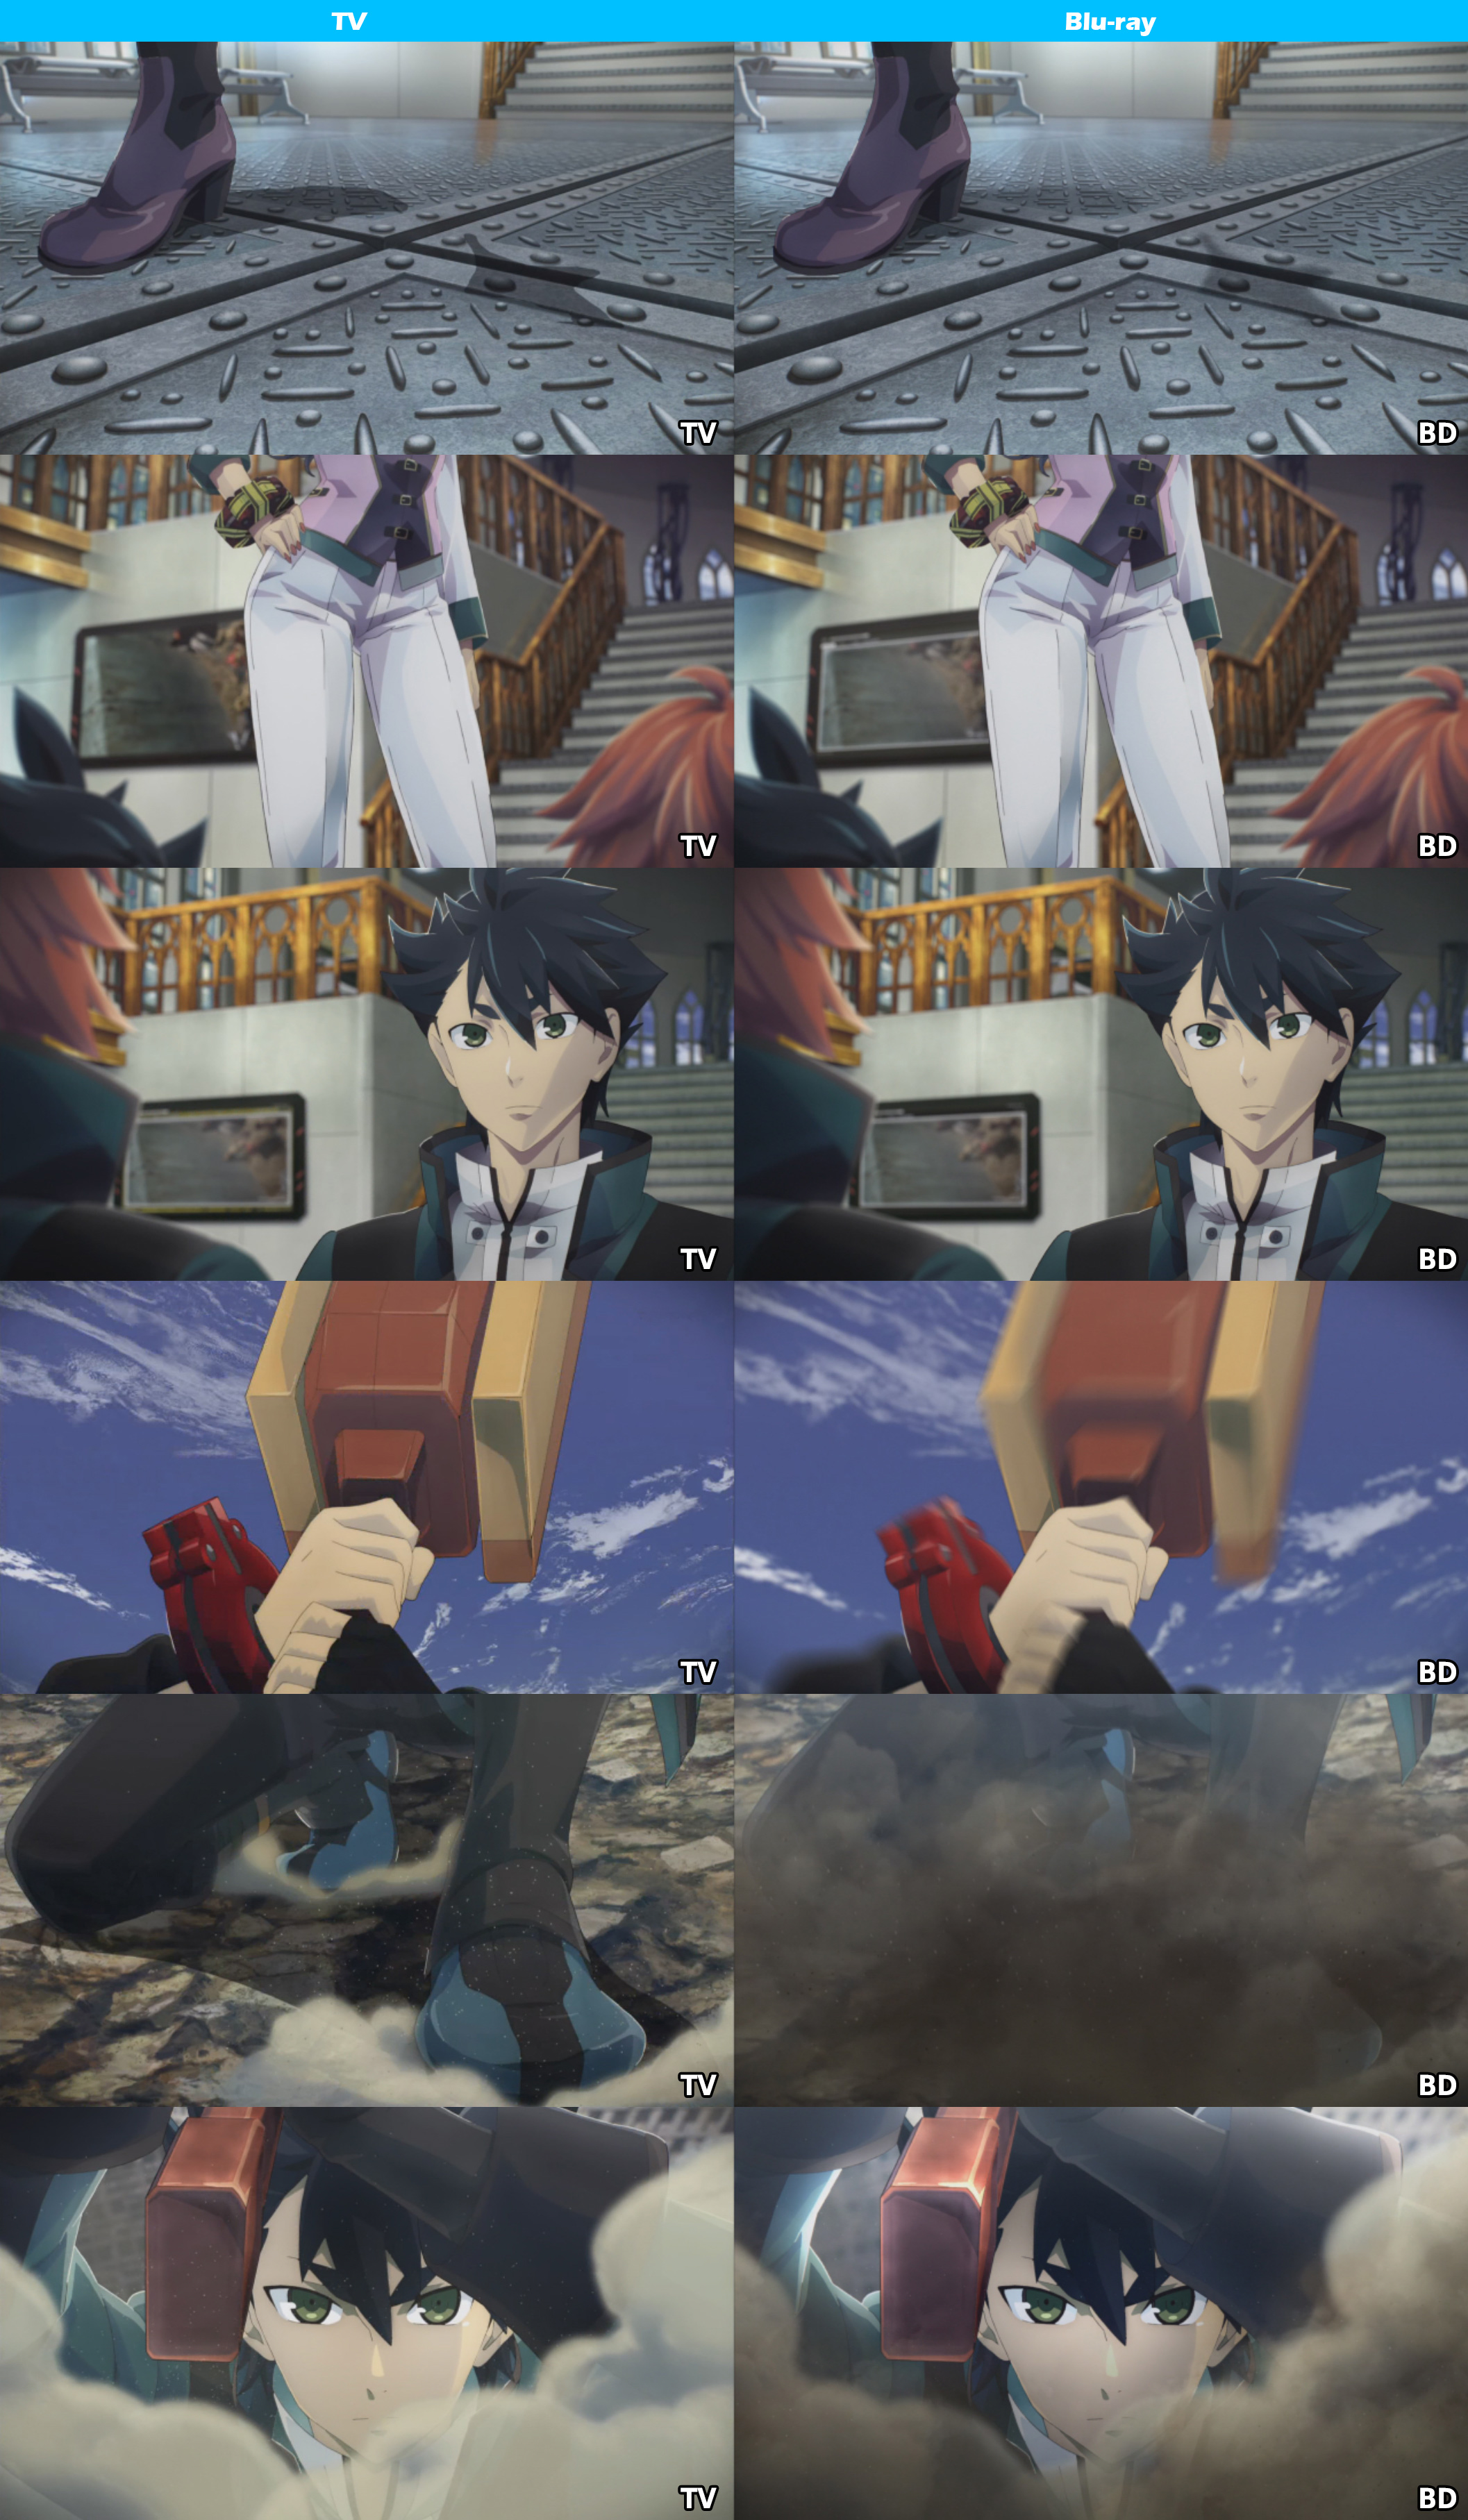 God-Eater-Anime-TV-and-Blu-ray-Comparison-1